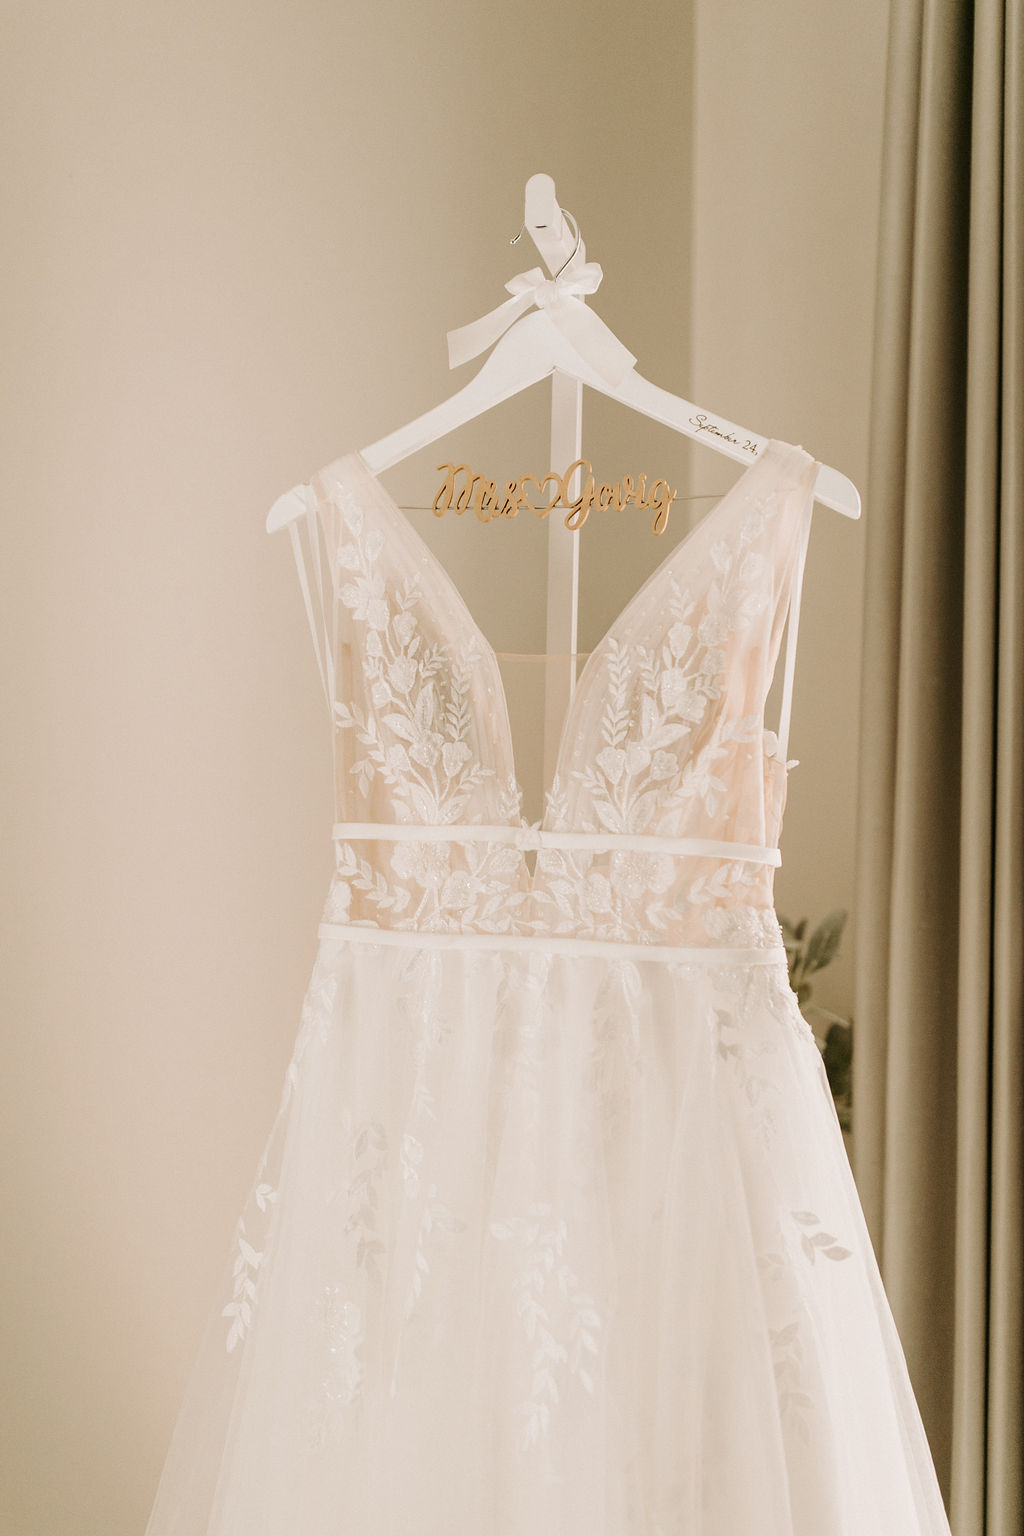 Customized bridal dress hanger with Sheer detailed bridal gown 